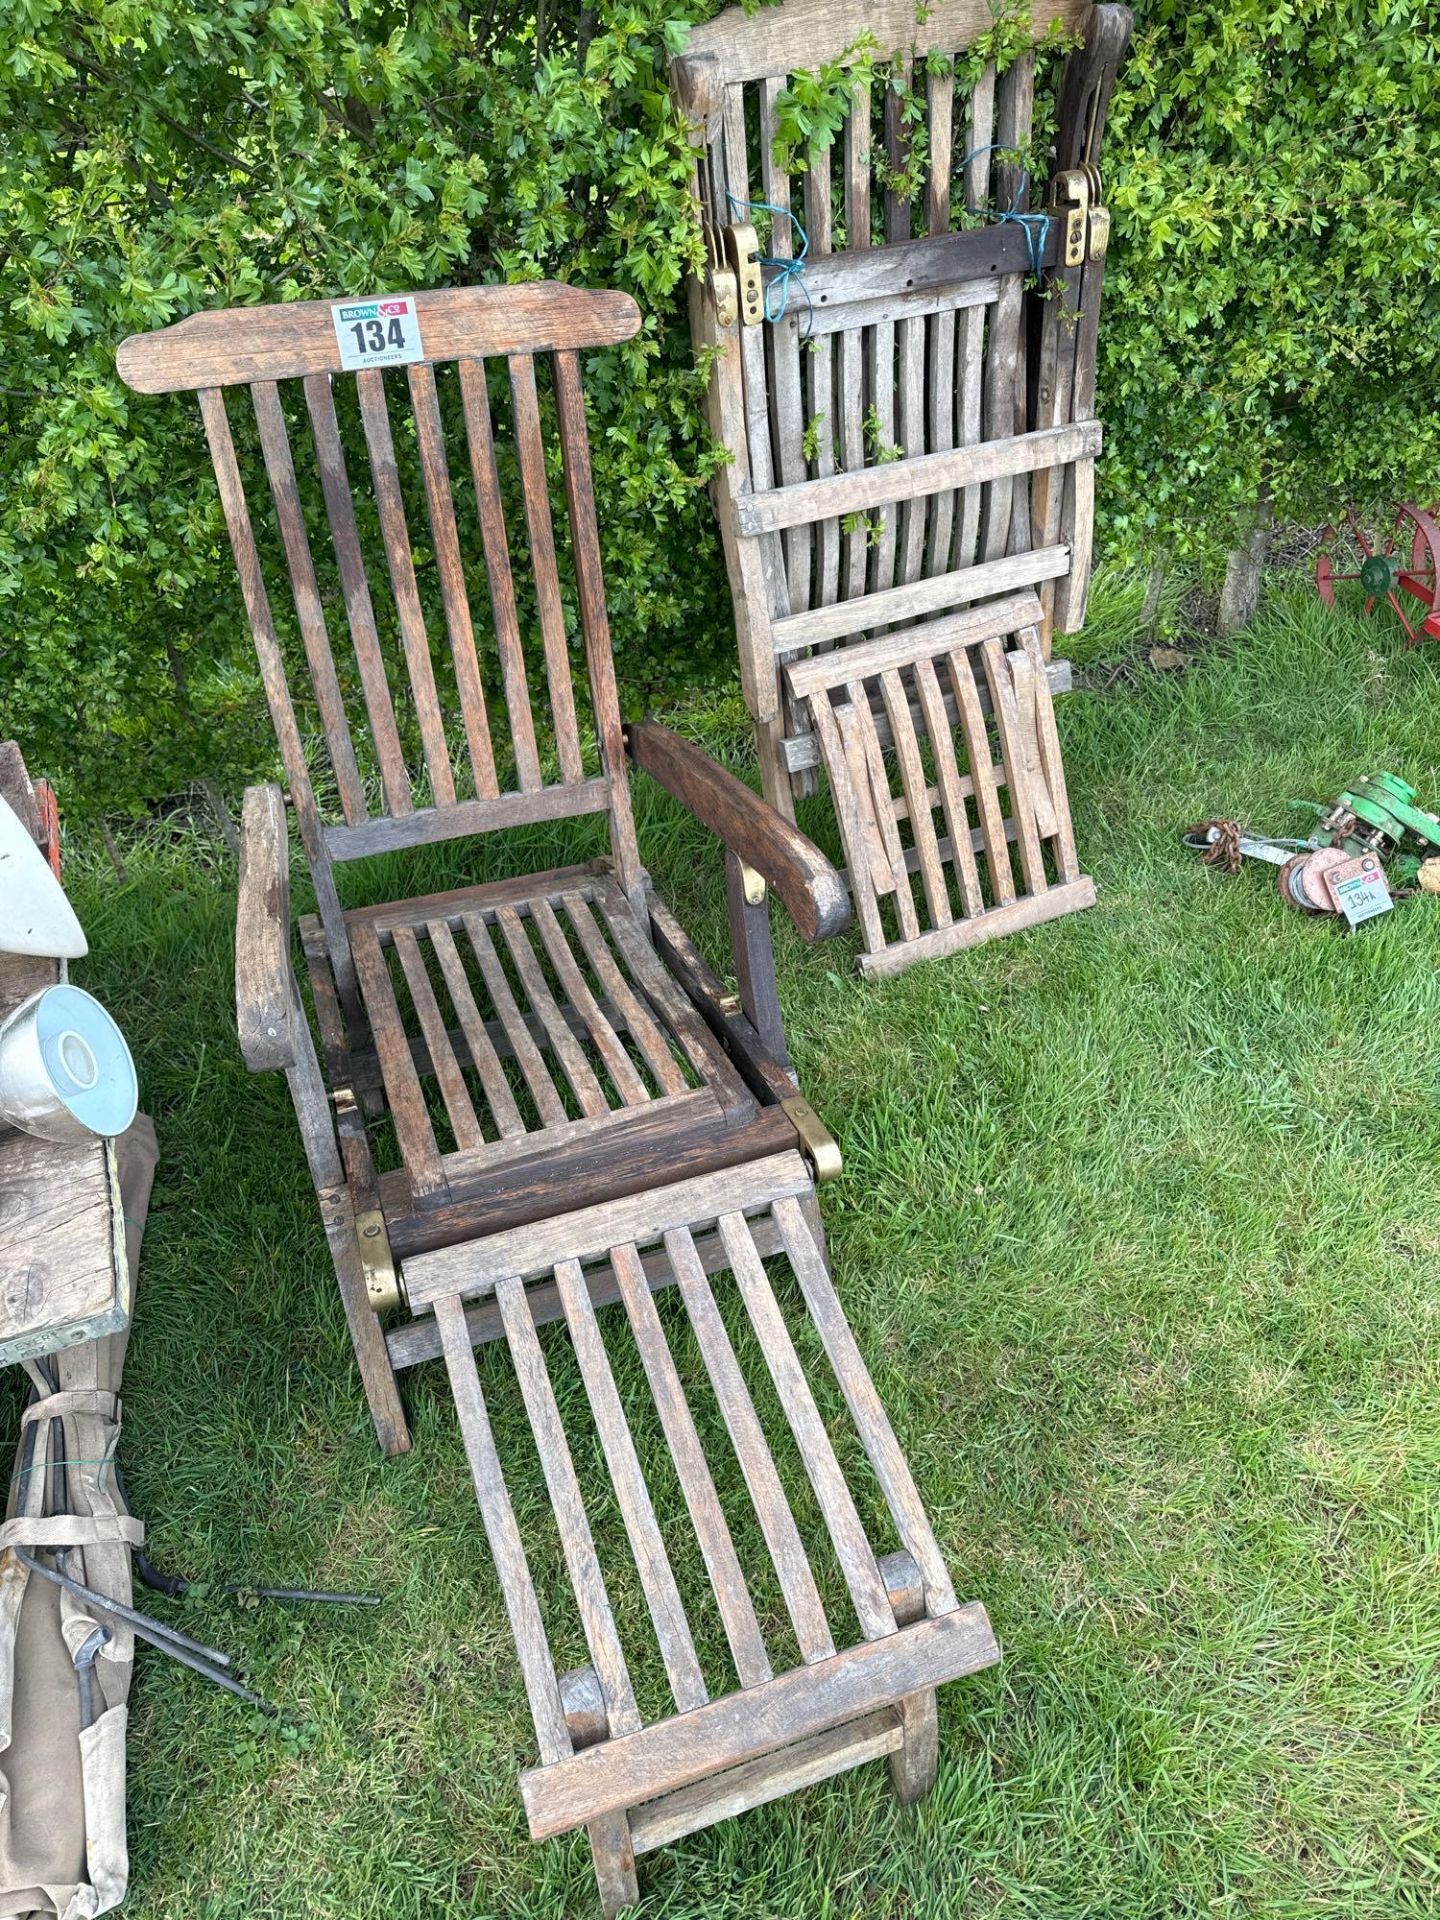 2No patio chairs